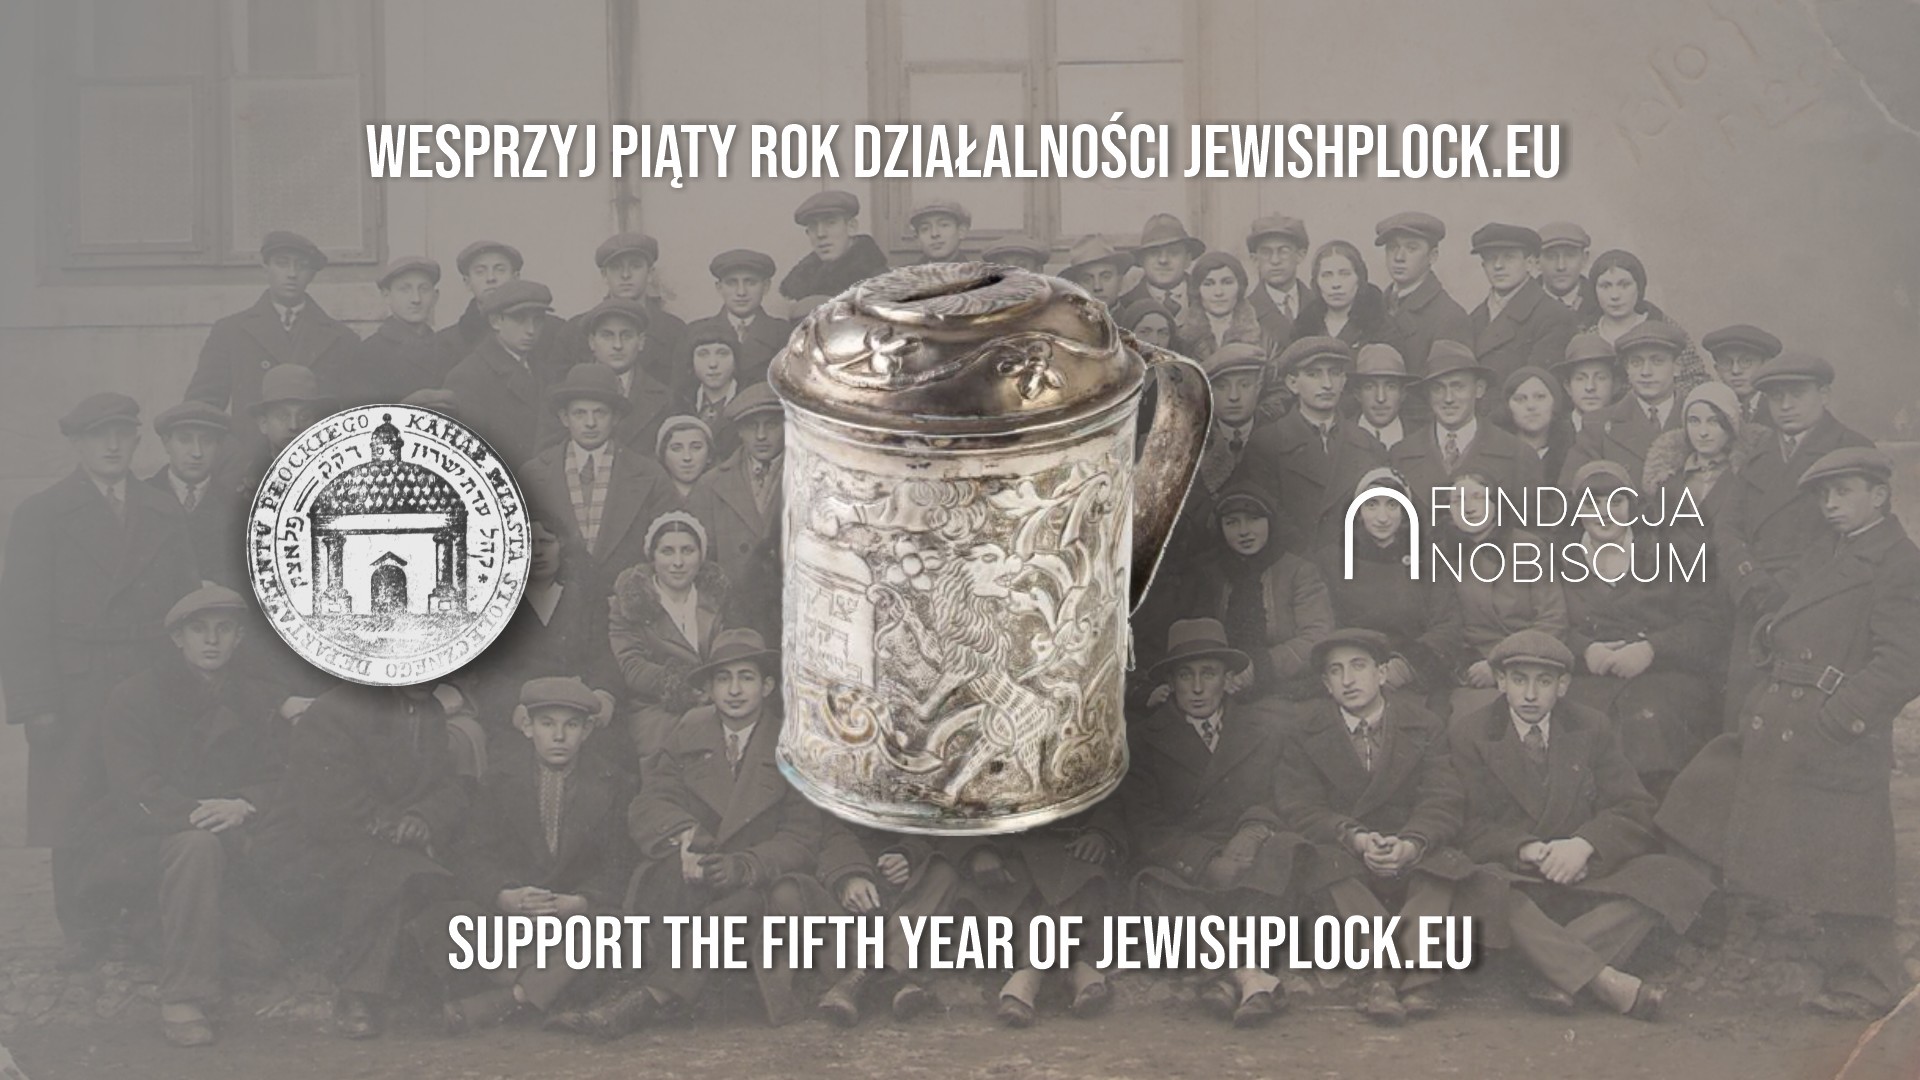 Support the fifth year of JewishPlock.eu!